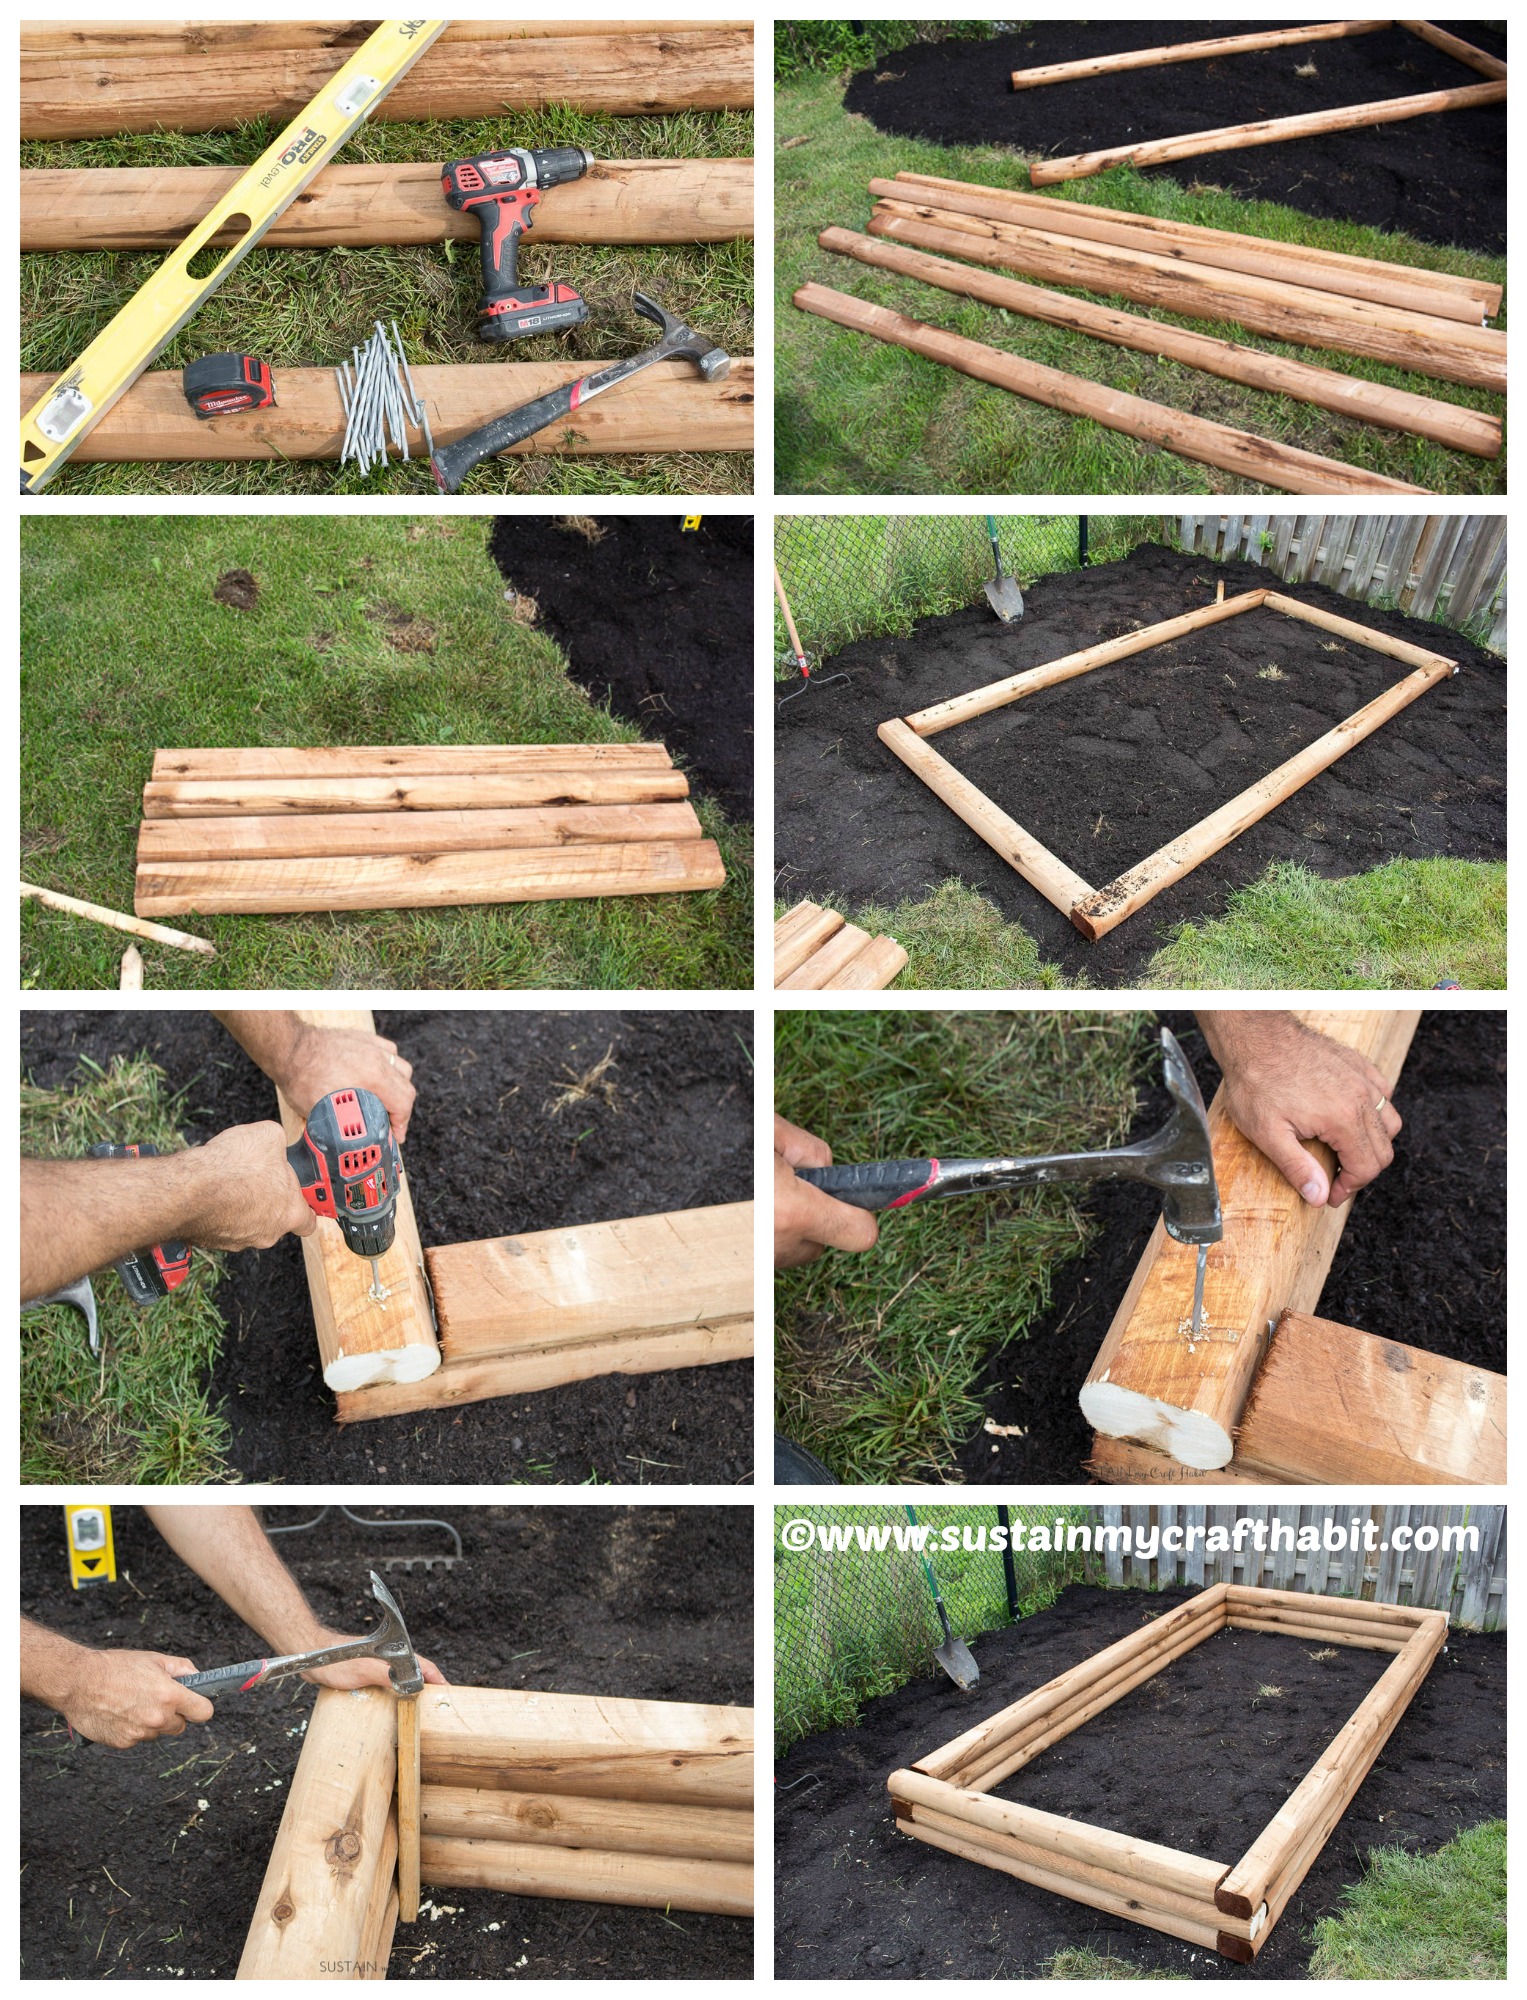 How to make a Raised Garden Bed